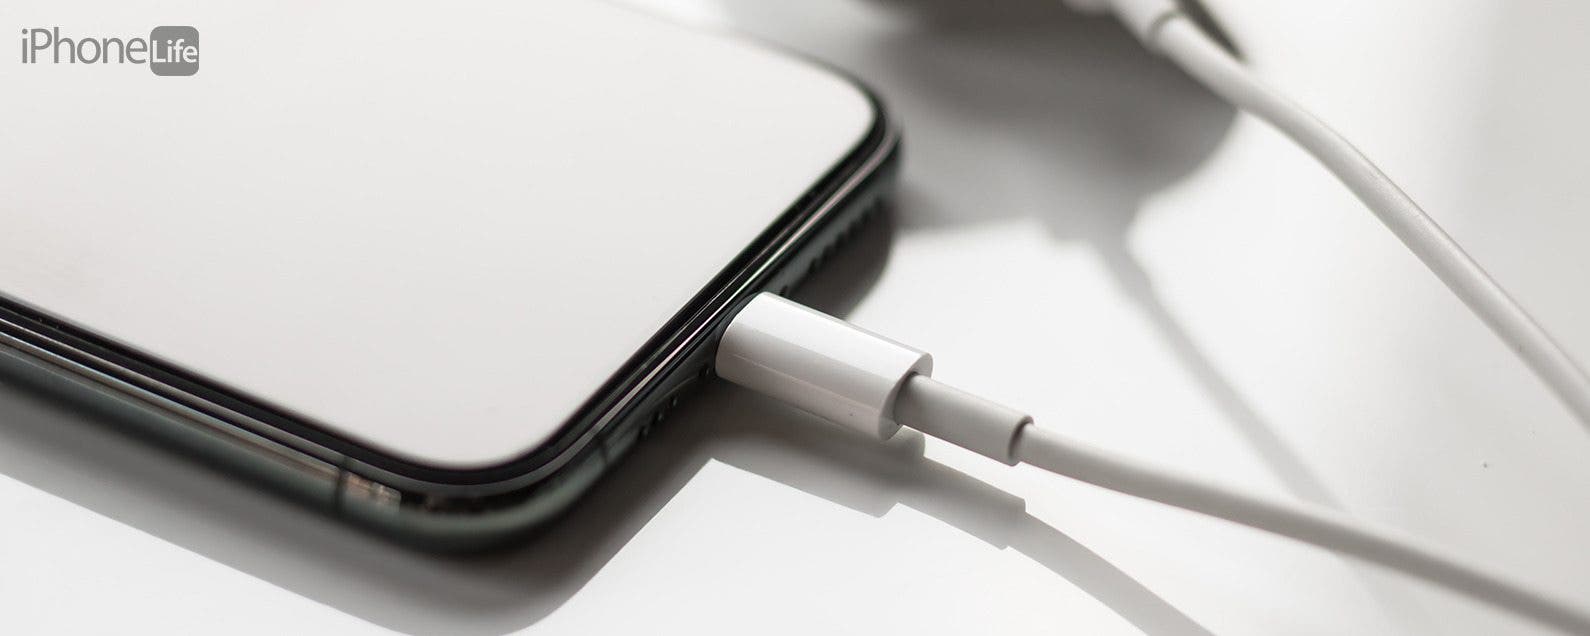 Can a MacBook Pro Charger Fast Charge an iPhone or iPad?